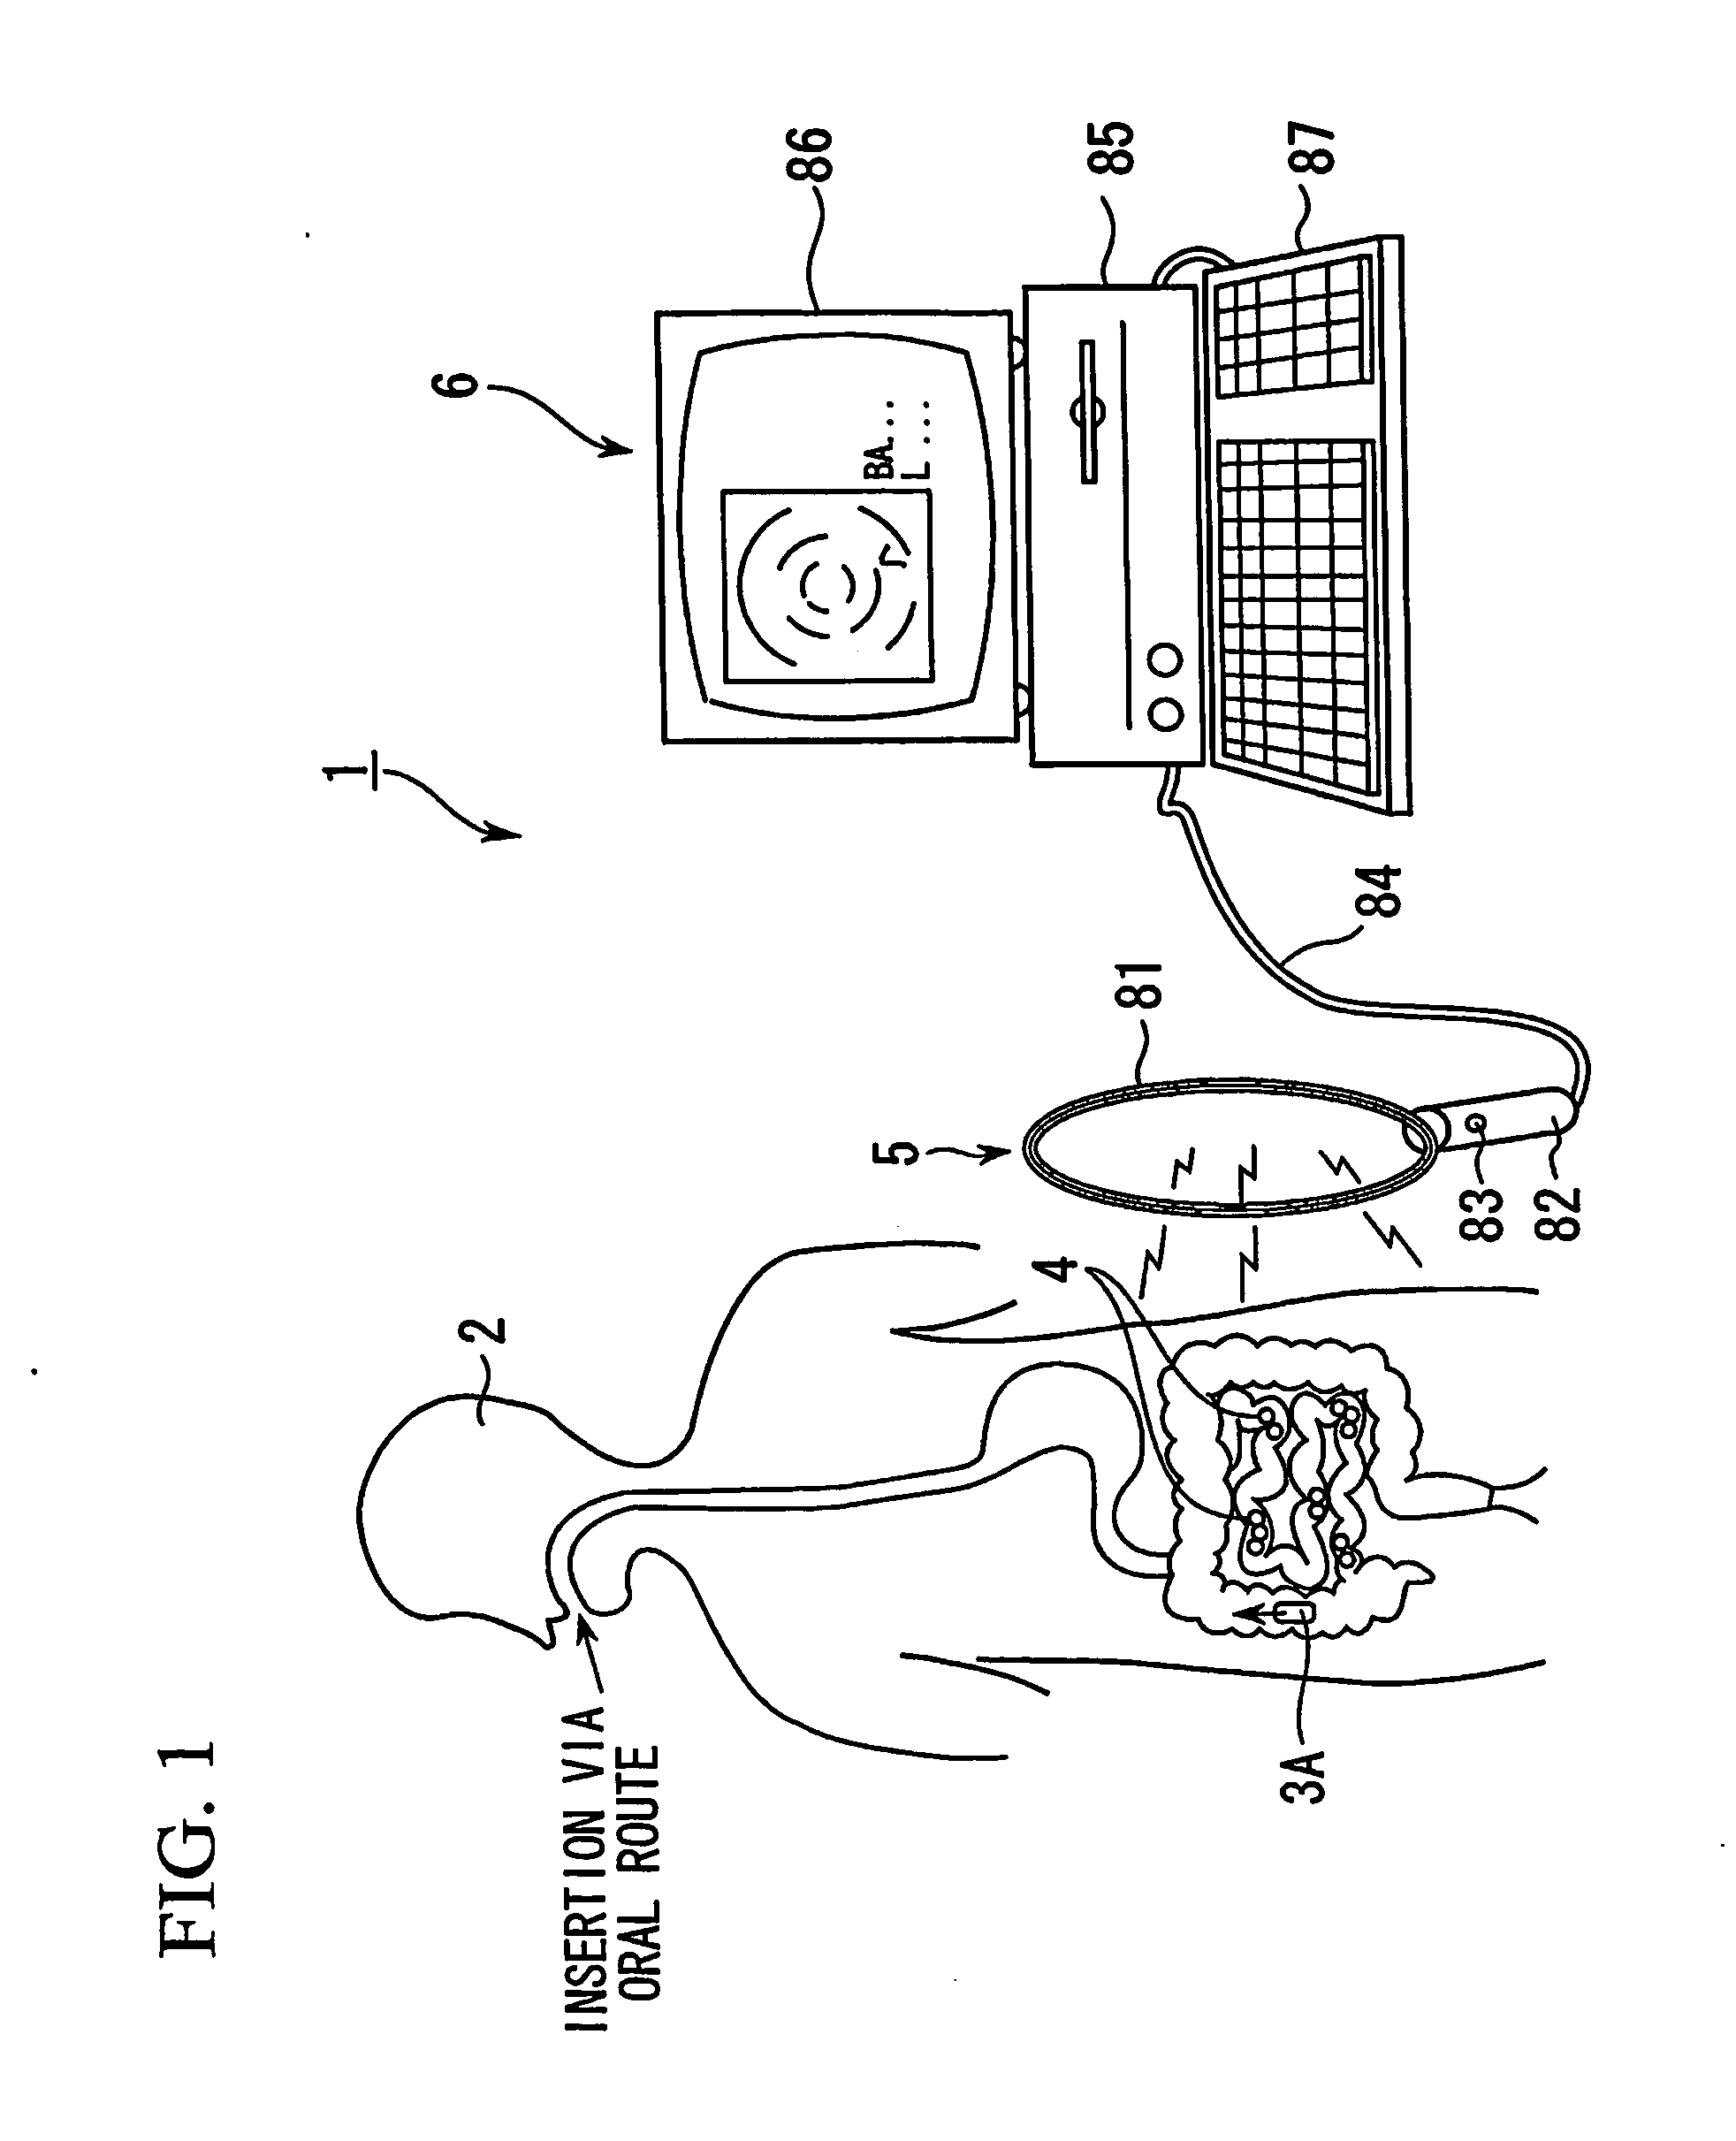 In-vivo information acquisition apparatus and in-vivo information acquisition apparatus system